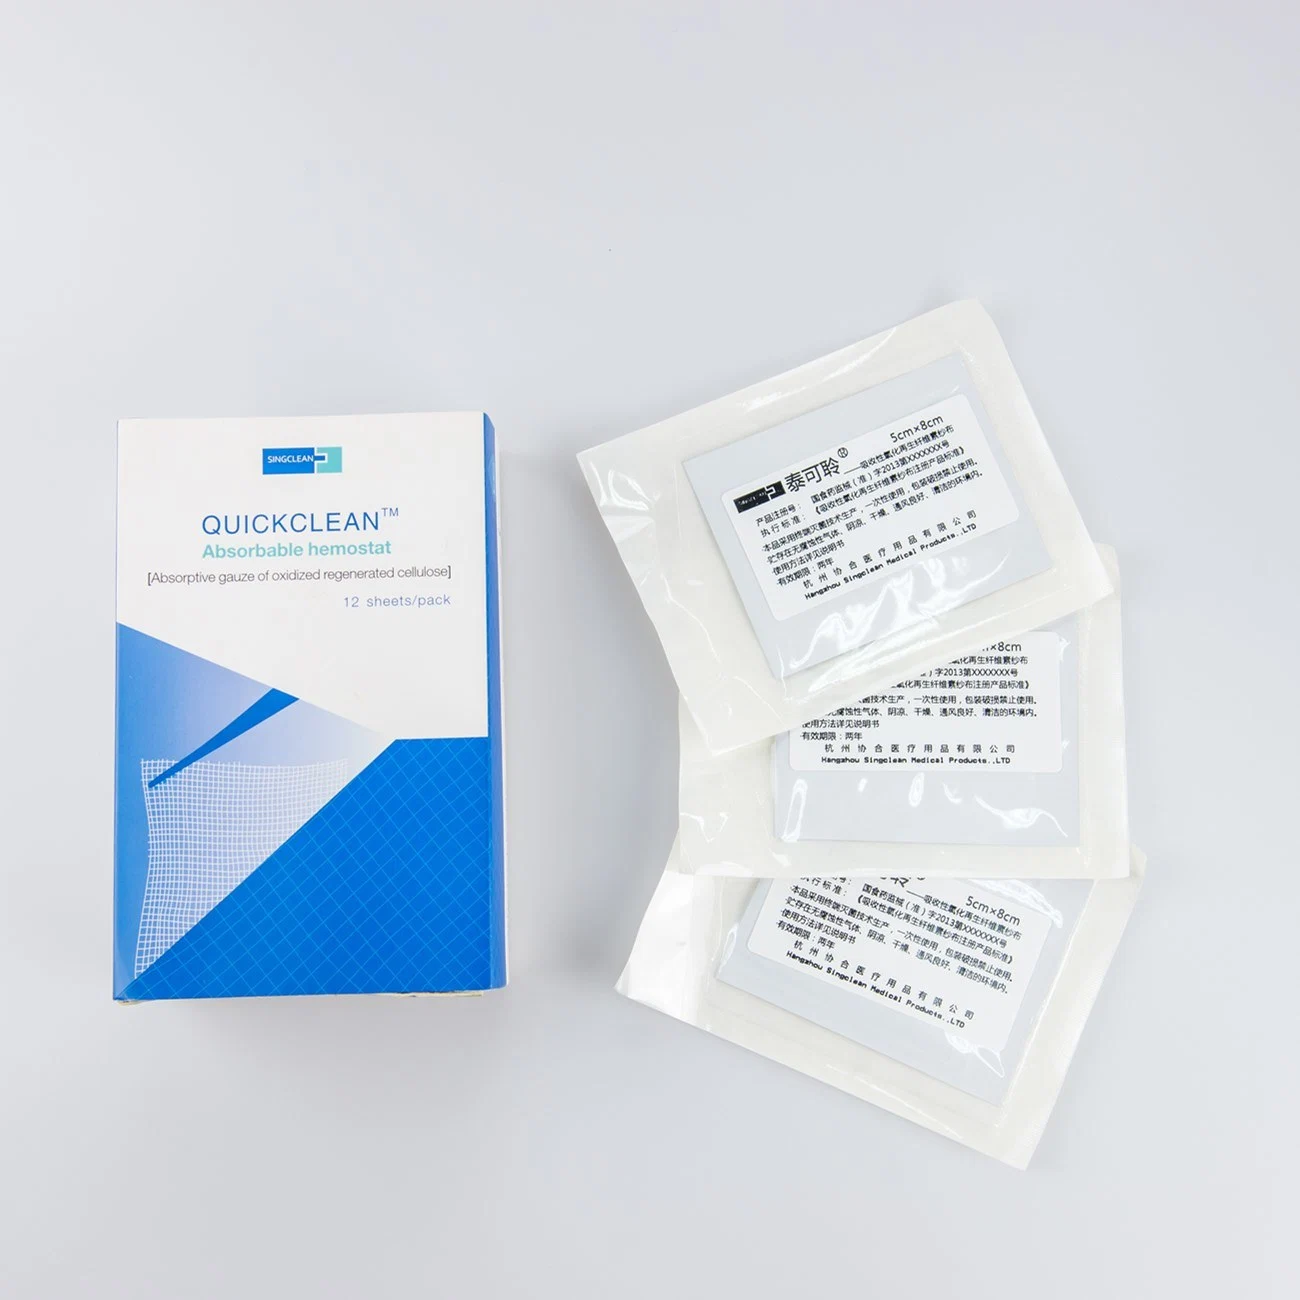 Manufacture Surgiclean 12 PCS / Box Oxidized Regenerated Cellulose Medical Dressing